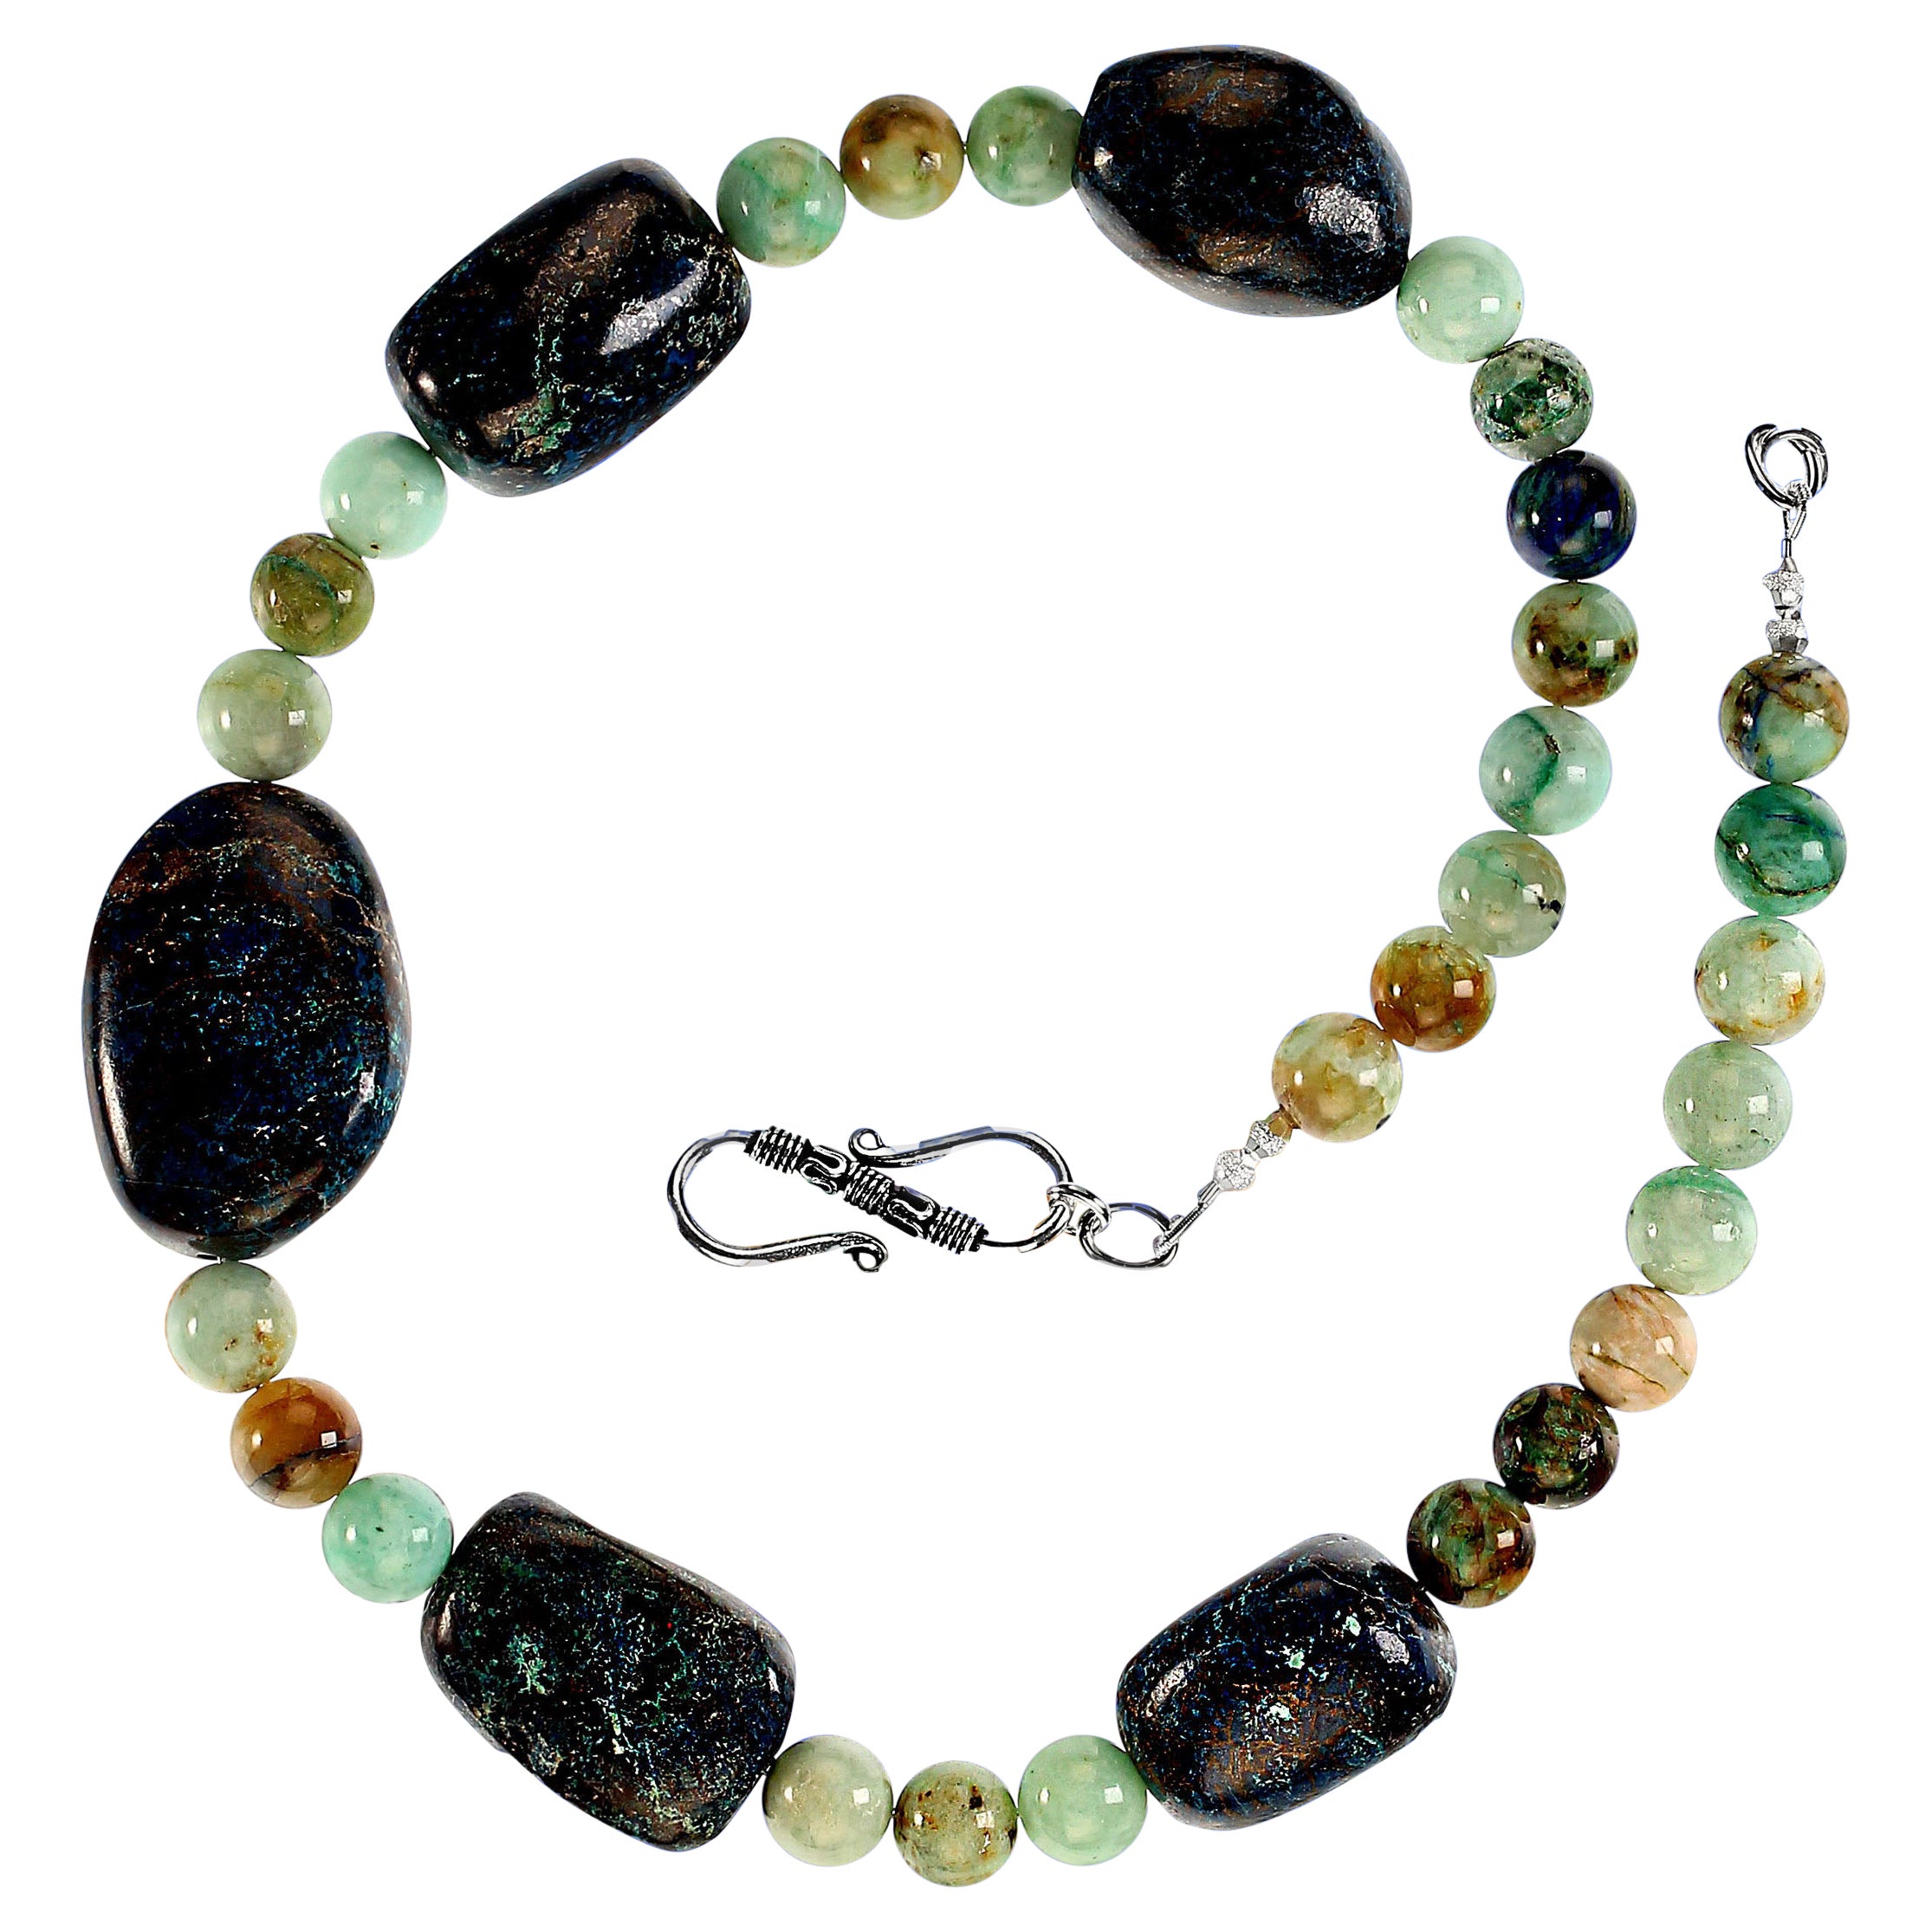 Unique 19-inch chrysocolla necklace featuring two very different looks of chrysocolla.  These lovely green 10mm beads are smooth and highly polished. They exhibit various shades of green as well as brown, blue, and tan.  The five large focals